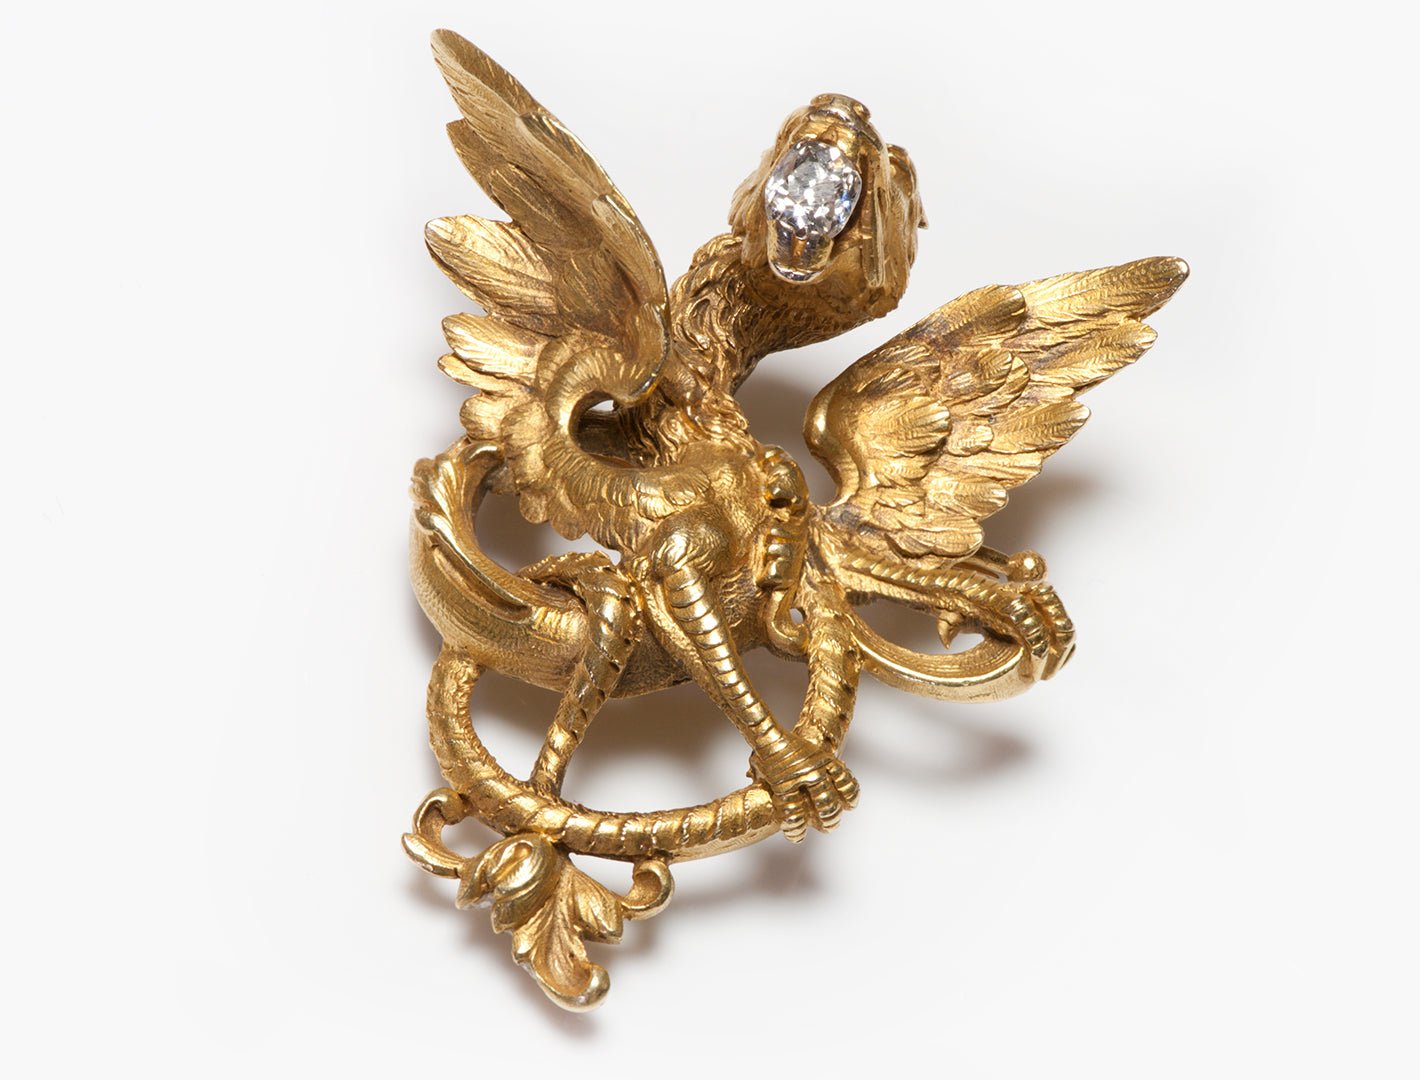 Antique French 18K Gold & Diamond Griffin Pendant Brooch